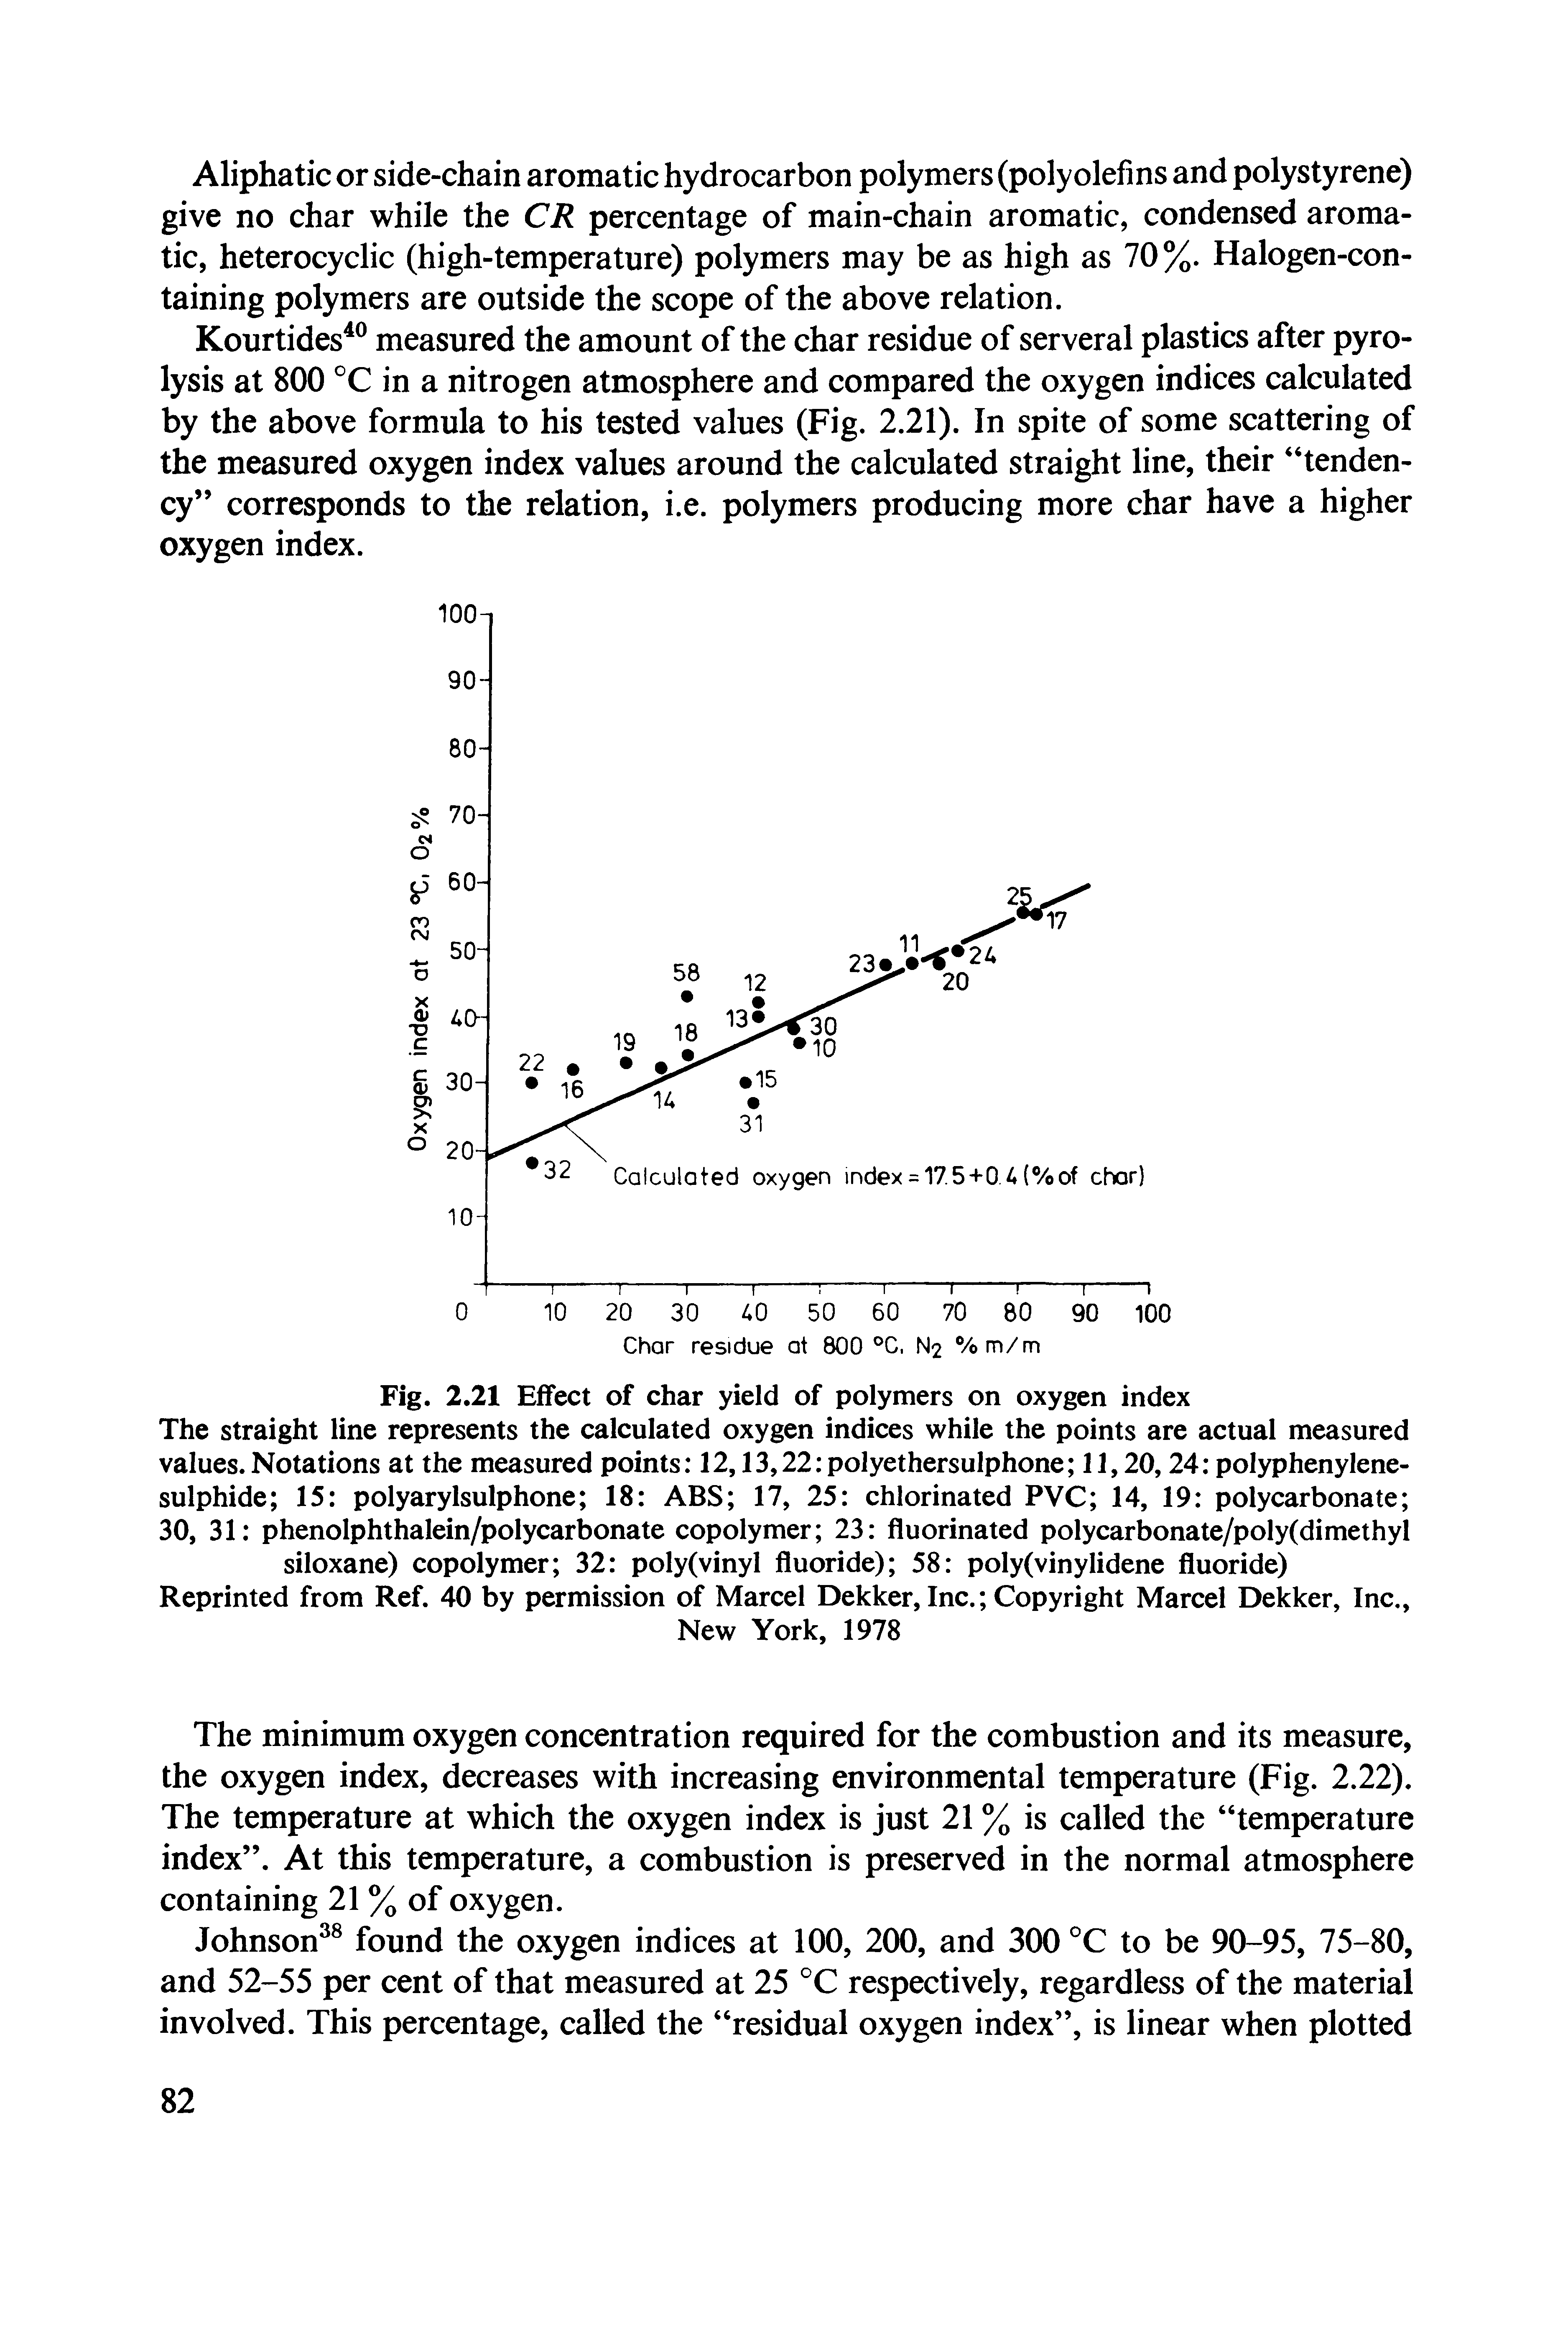 Fig. 2.21 Effect of char yield of polymers on oxygen index The straight line represents the calculated oxygen indices while the points are actual measured values. Notations at the measured points 12,13,22 polyethersulphone 11,20,24 polyphenylene-sulphide 15 polyarylsulphone 18 ABS 17, 25 chlorinated PVC 14, 19 polycarbonate 30, 31 phenolphthalein/polycarbonate copolymer 23 fluorinated polycarbonate/poly(dimethyl siloxane) copolymer 32 poly(vinyl fluoride) 58 poly(vinylidene fluoride) Reprinted from Ref. 40 by permission of Marcel Dekker, Inc. Copyright Marcel Dekker, Inc.,...